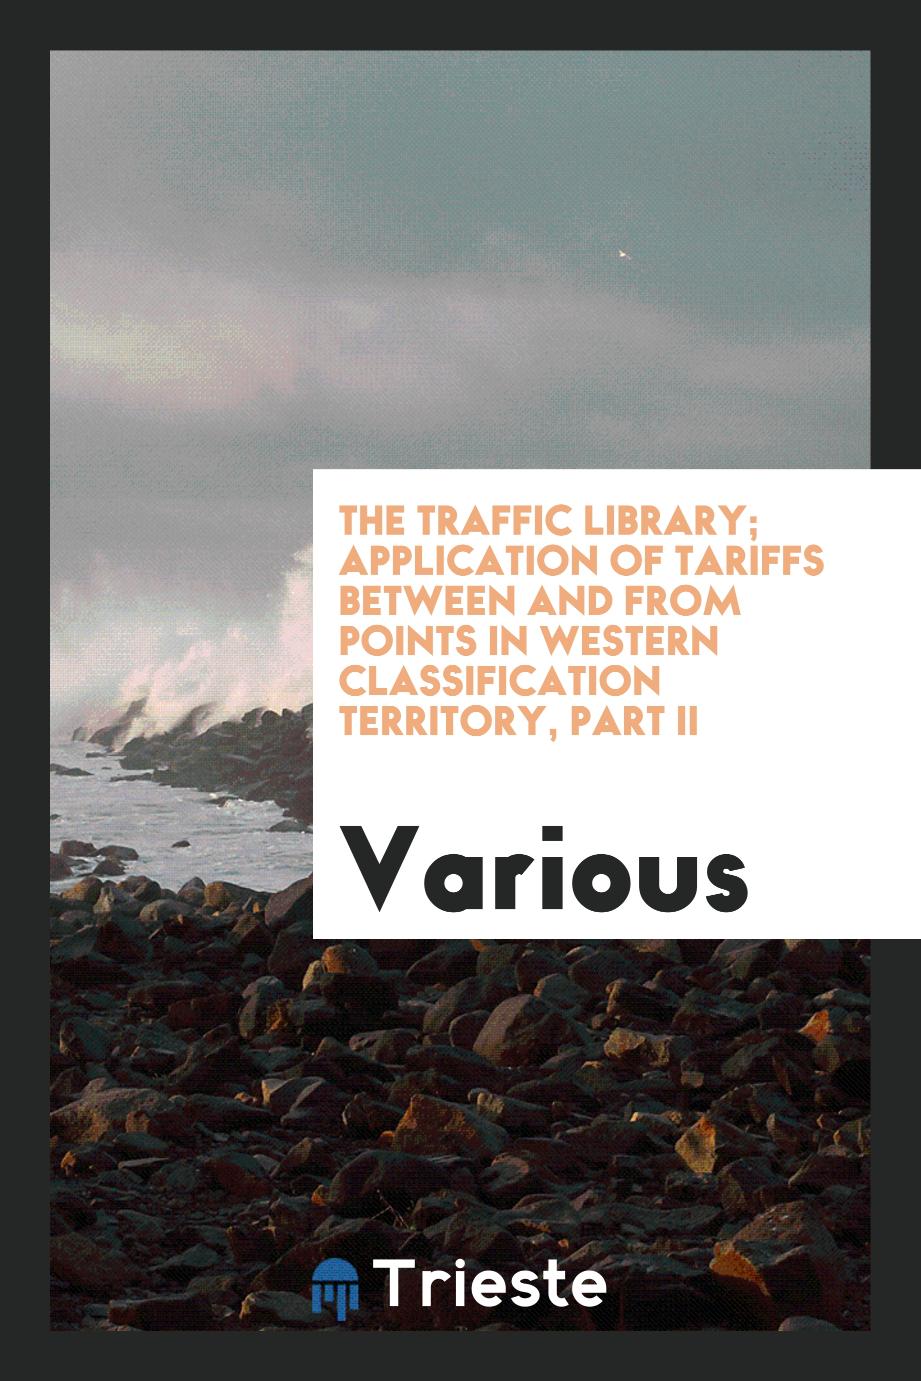 The traffic library; Application of Tariffs Between and from points in Western Classification Territory, Part II